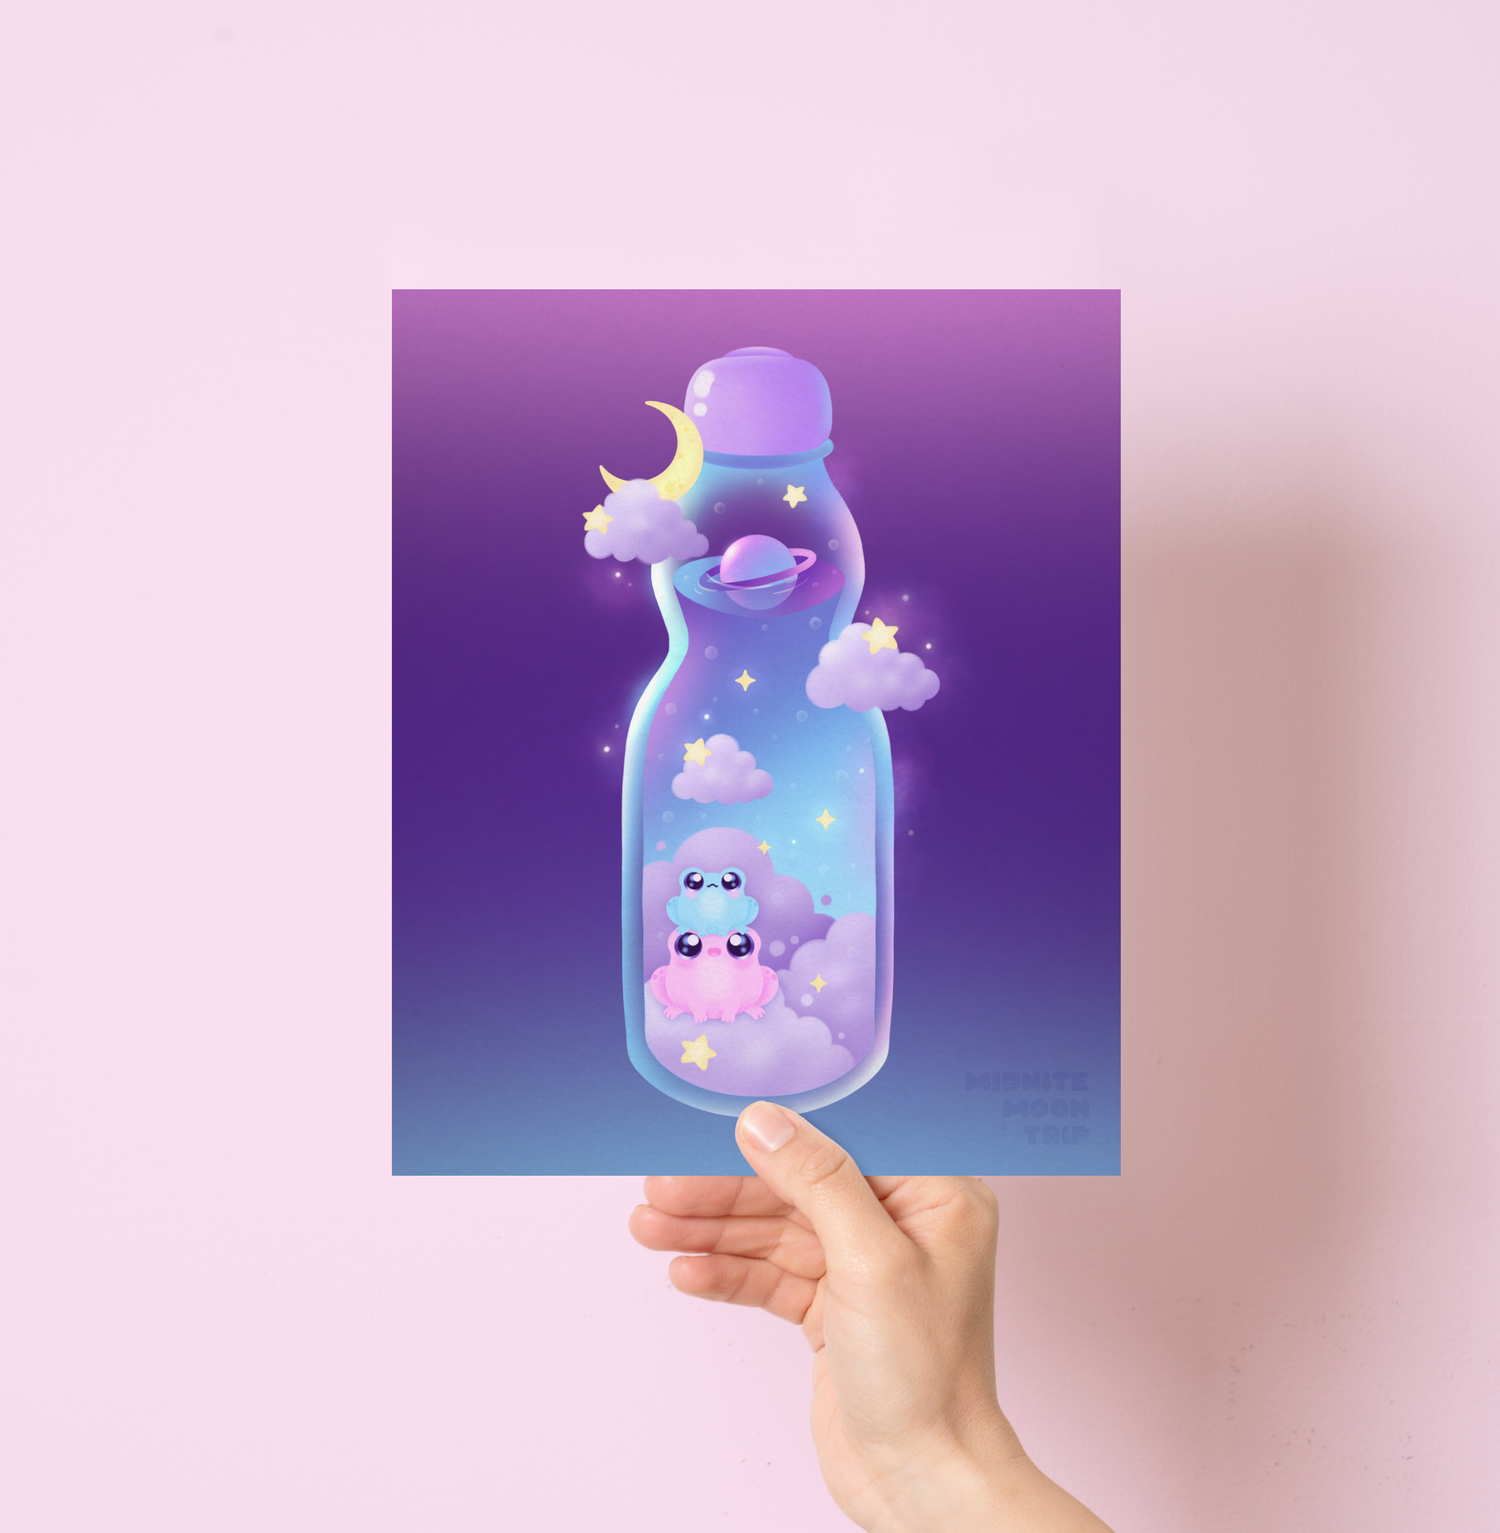 art print with illustration of cute pink and blue frogs in a bottle of ramune soda in outer space